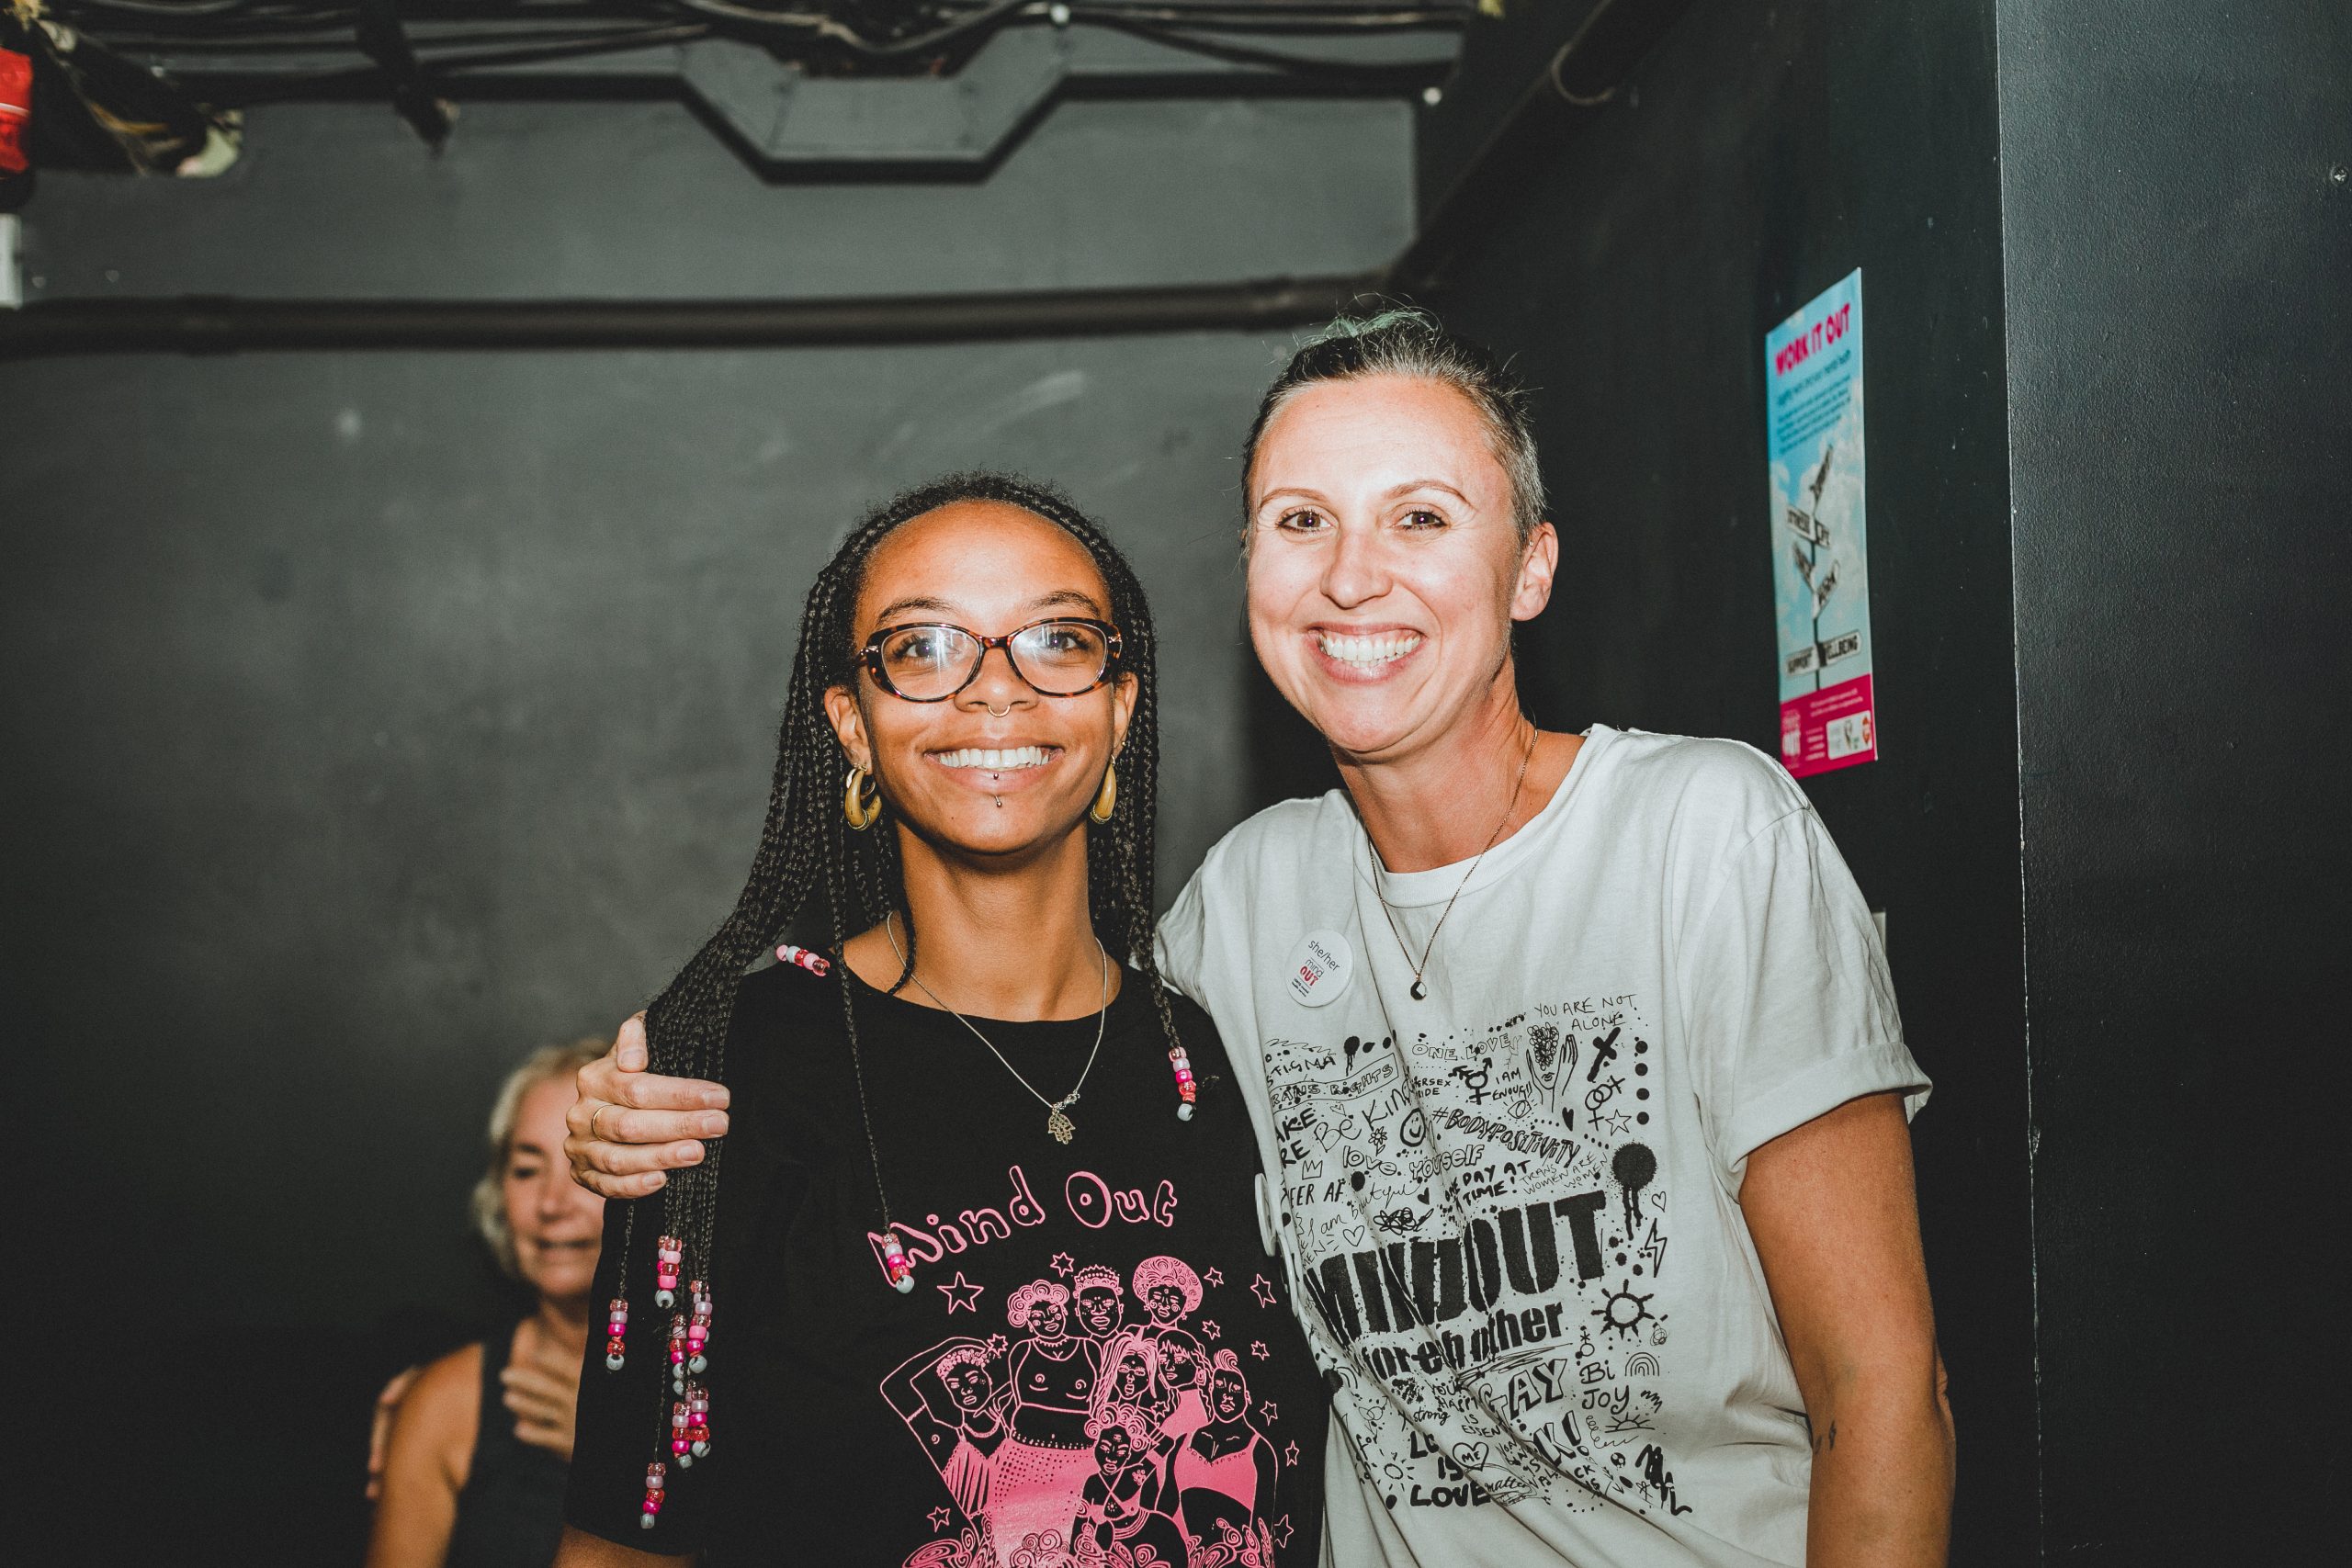 Malaika and Lucy (MindOut staff) smiling together. Both wearing MindOut merch